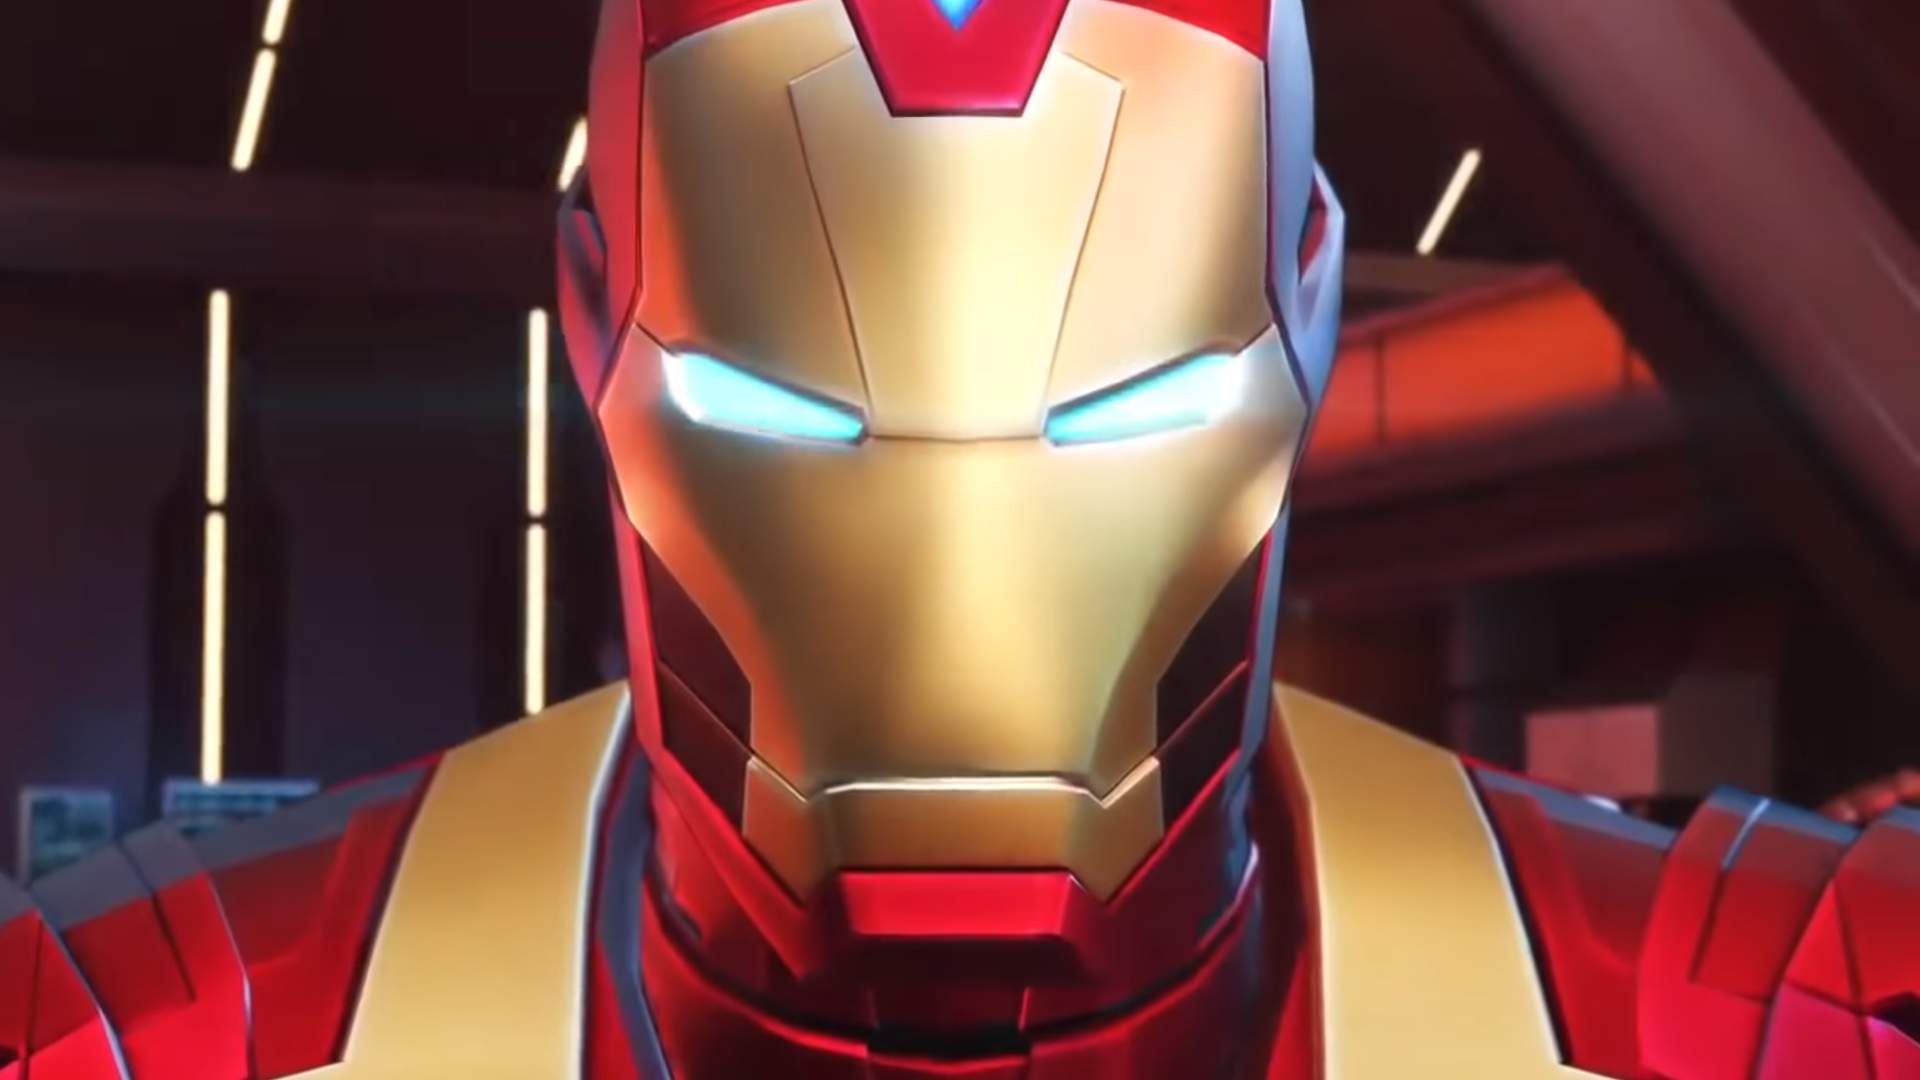 Best ISO-8s for Iron Man in Marvel Ultimate Alliance 3